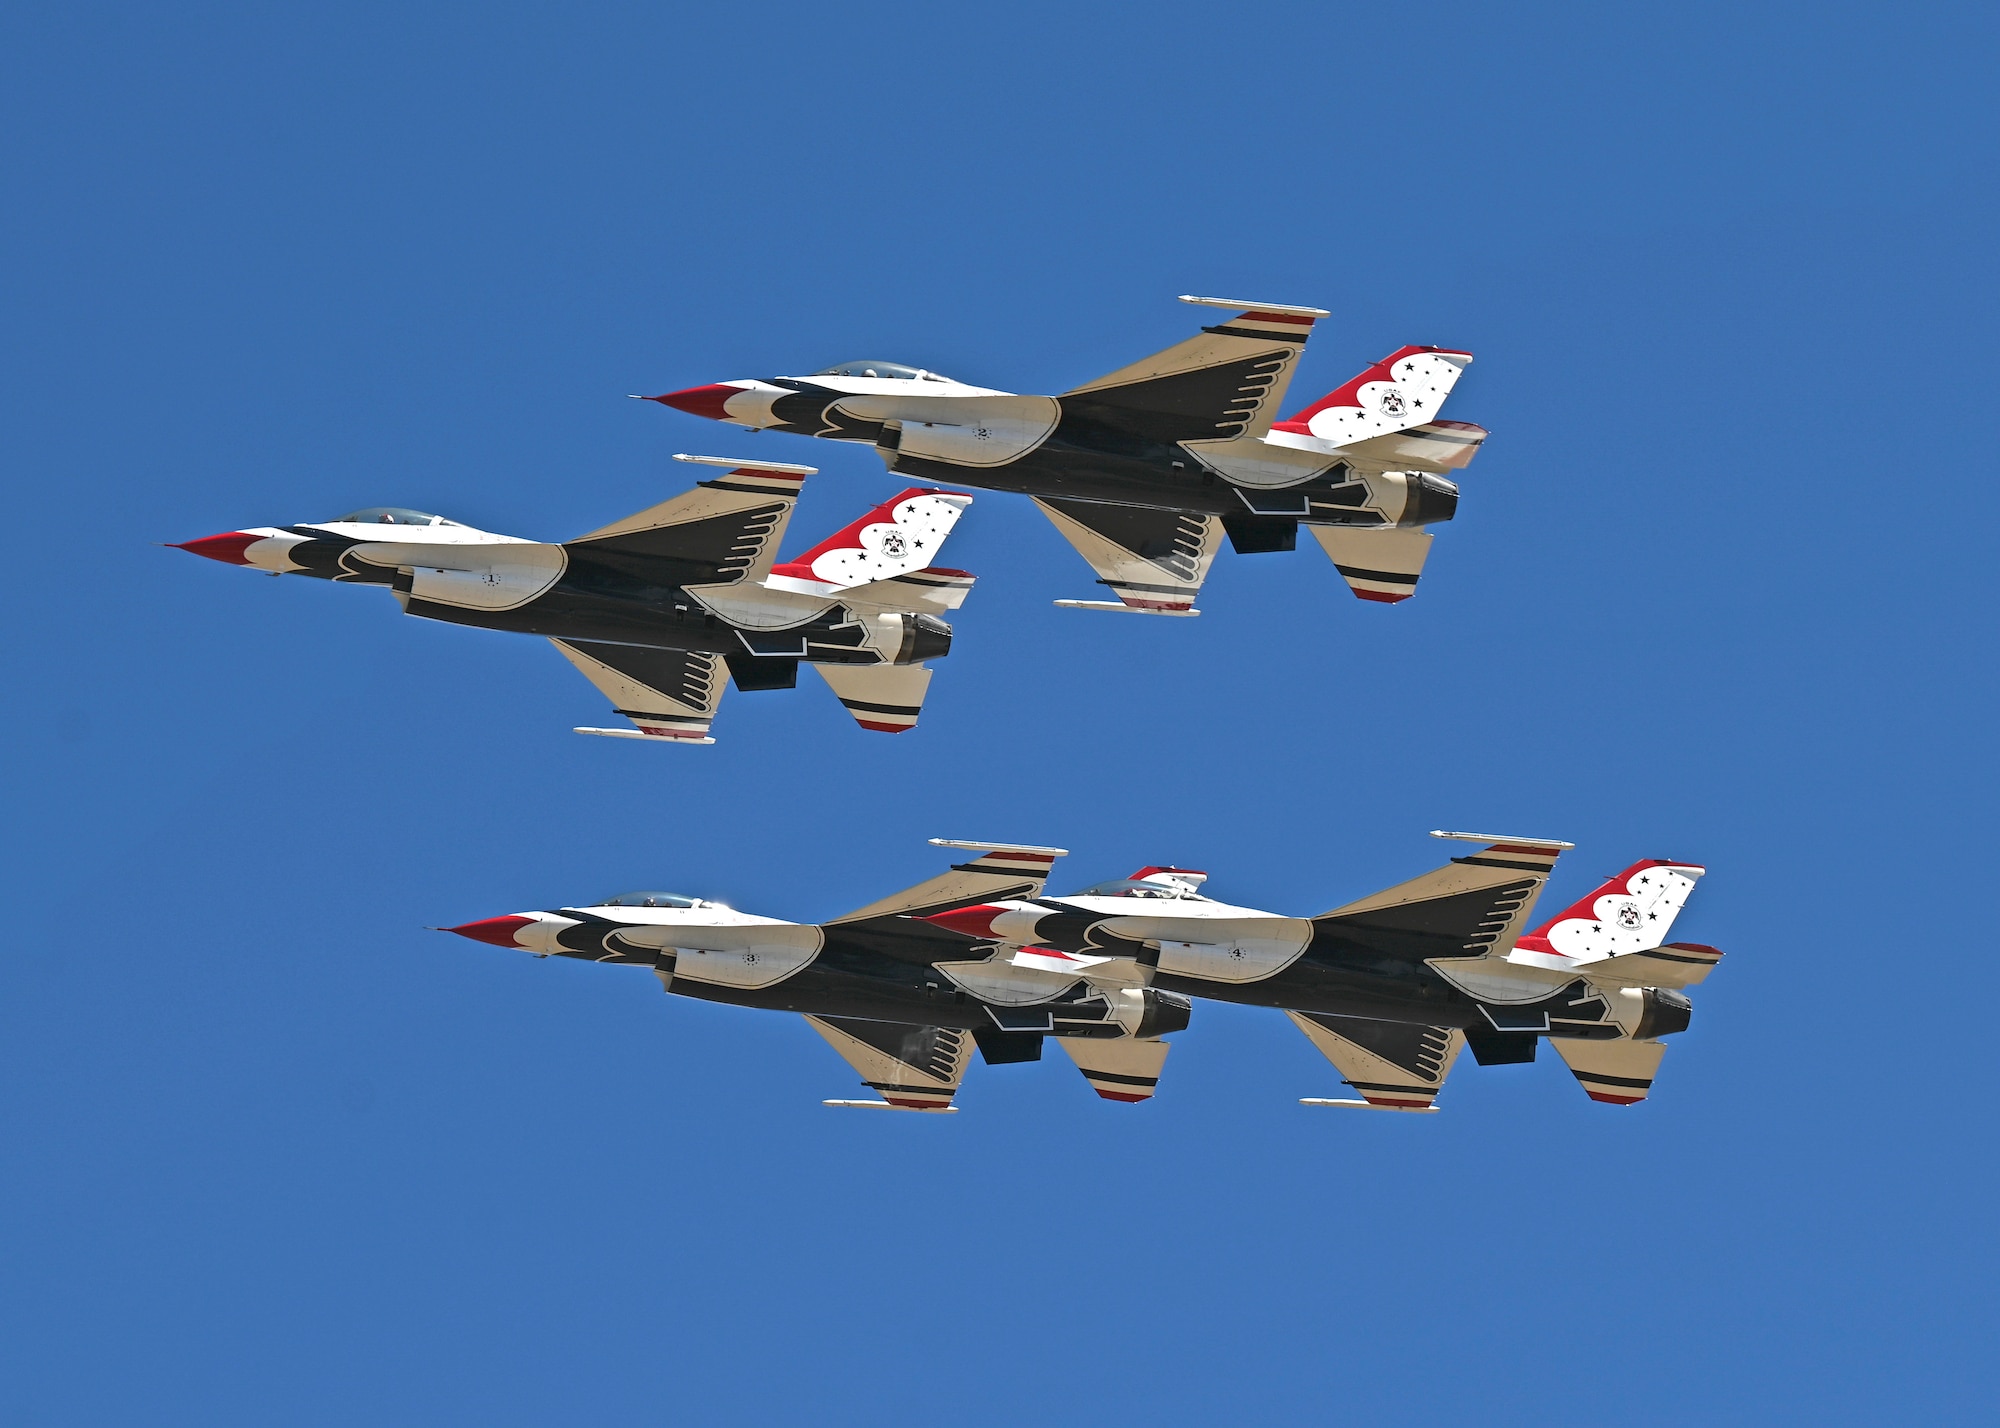 The U.S. Air Force Air Demonstration Squadron “Thunderbirds” #1-4 fly F-16 Fighting Falcons above the McChord Field flightline in preparation for the Joint Base Lewis-McChord Airshow and Warrior Expo before landing at JBLM, Washington, July 12, 2023. The mission of the JAWE is to foster goodwill to educate and familiarize attendees with the people, mission, and equipment of the Air Force, Army, and other Armed Services while continuing to provide installation-wide mission support. The U.S. Air Force Air Demonstration Squadron “Thunderbirds” are one of the JAWE’s premier acts and will be joined by aerial demonstrations from the C-17 West Coast Demonstration Team, Tora! Tora! Tora! and many more. (U.S. Air Force photo by Senior Airman Callie Norton)